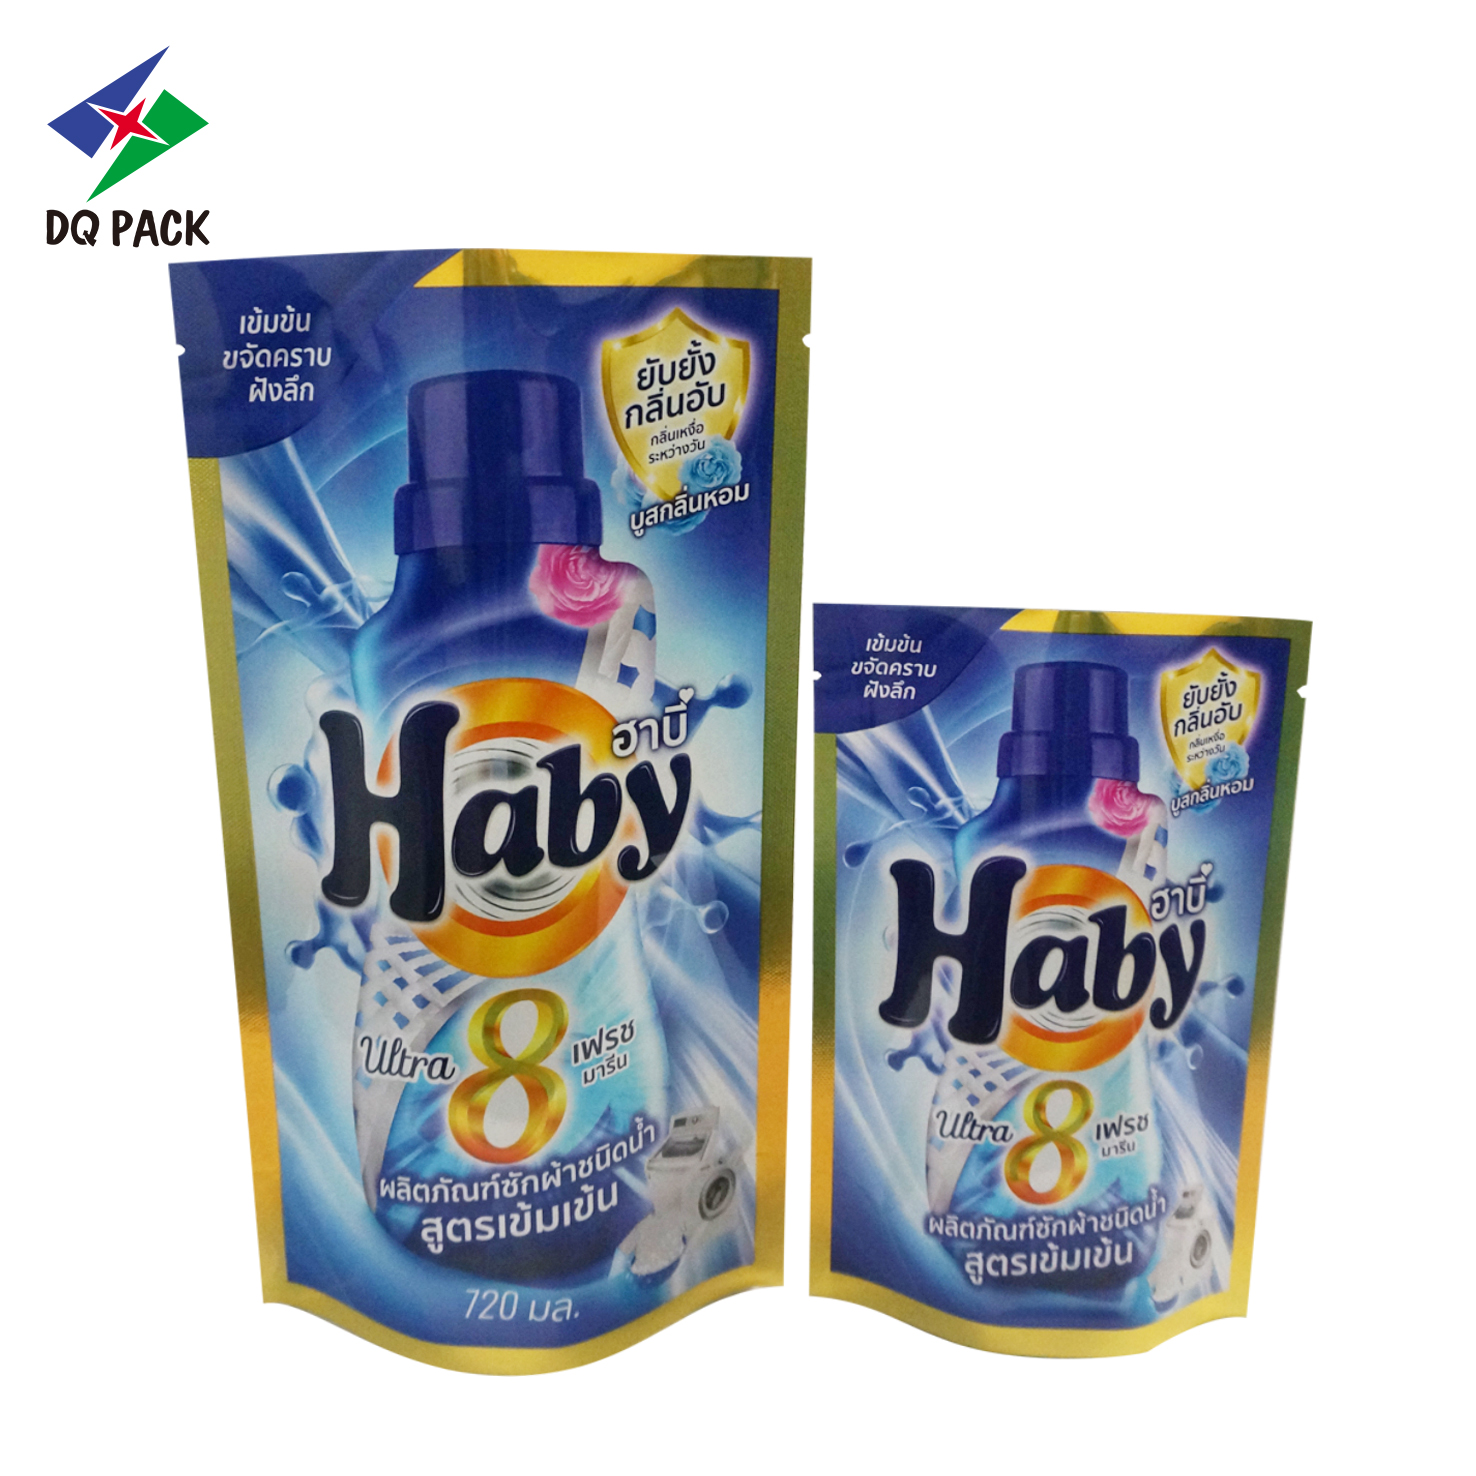 Competitive Price for Bottle Label - DQ PACK Laundry Detergent Stand up bag Hot Seal bag hot sale packaging bag For Chemical – DQ PACK